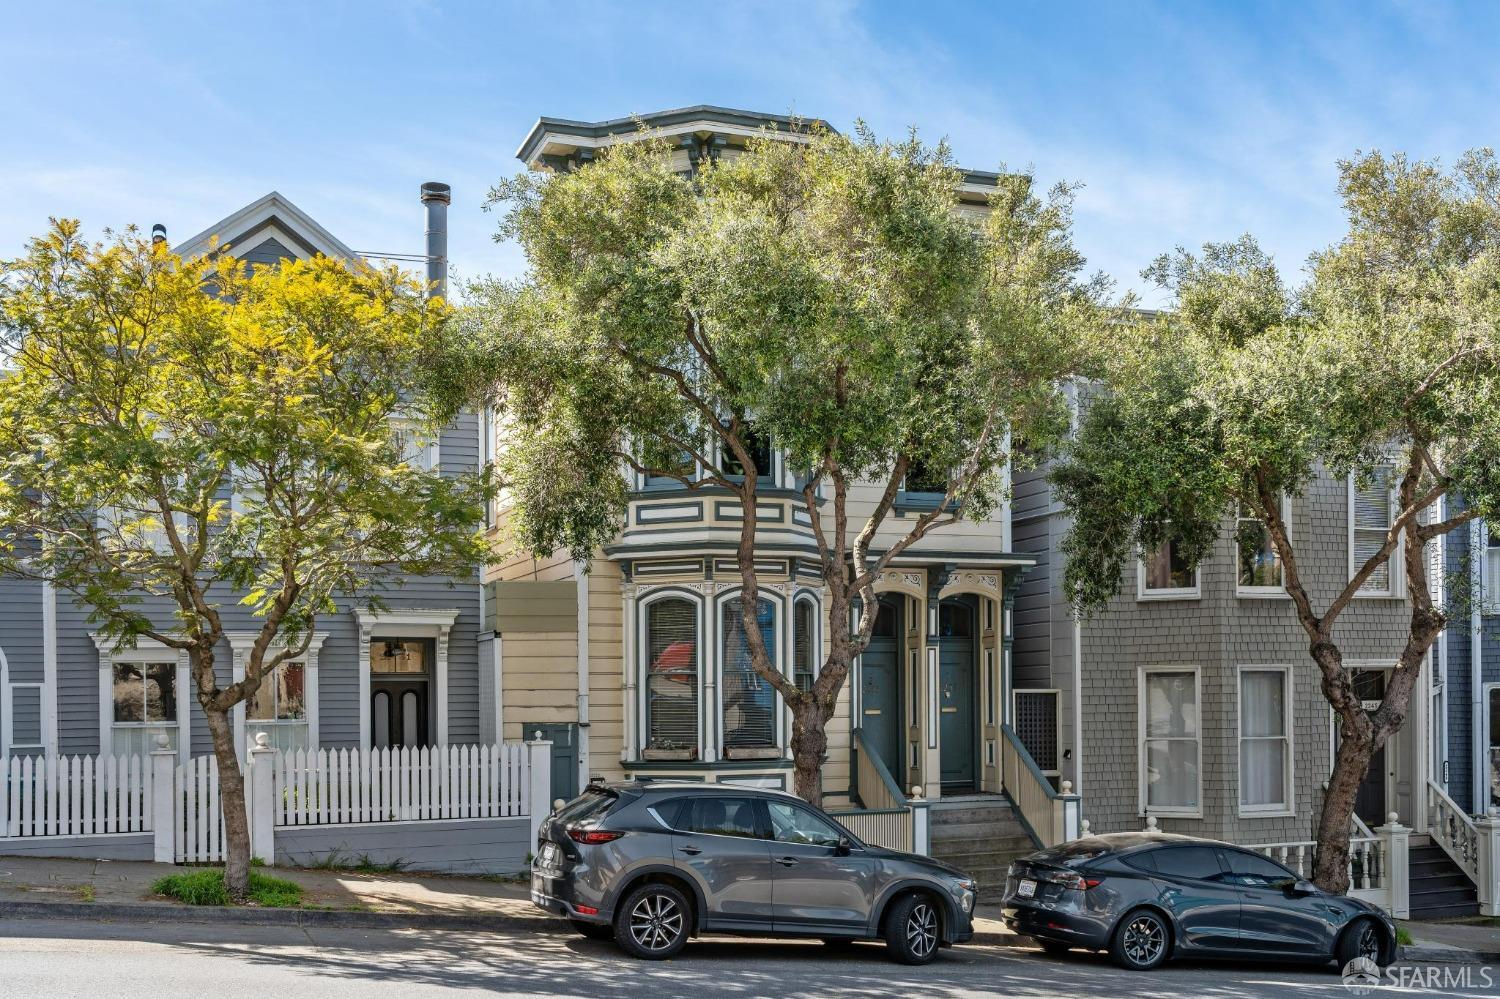 Photo of 2237-2239 Pine St in San Francisco, CA